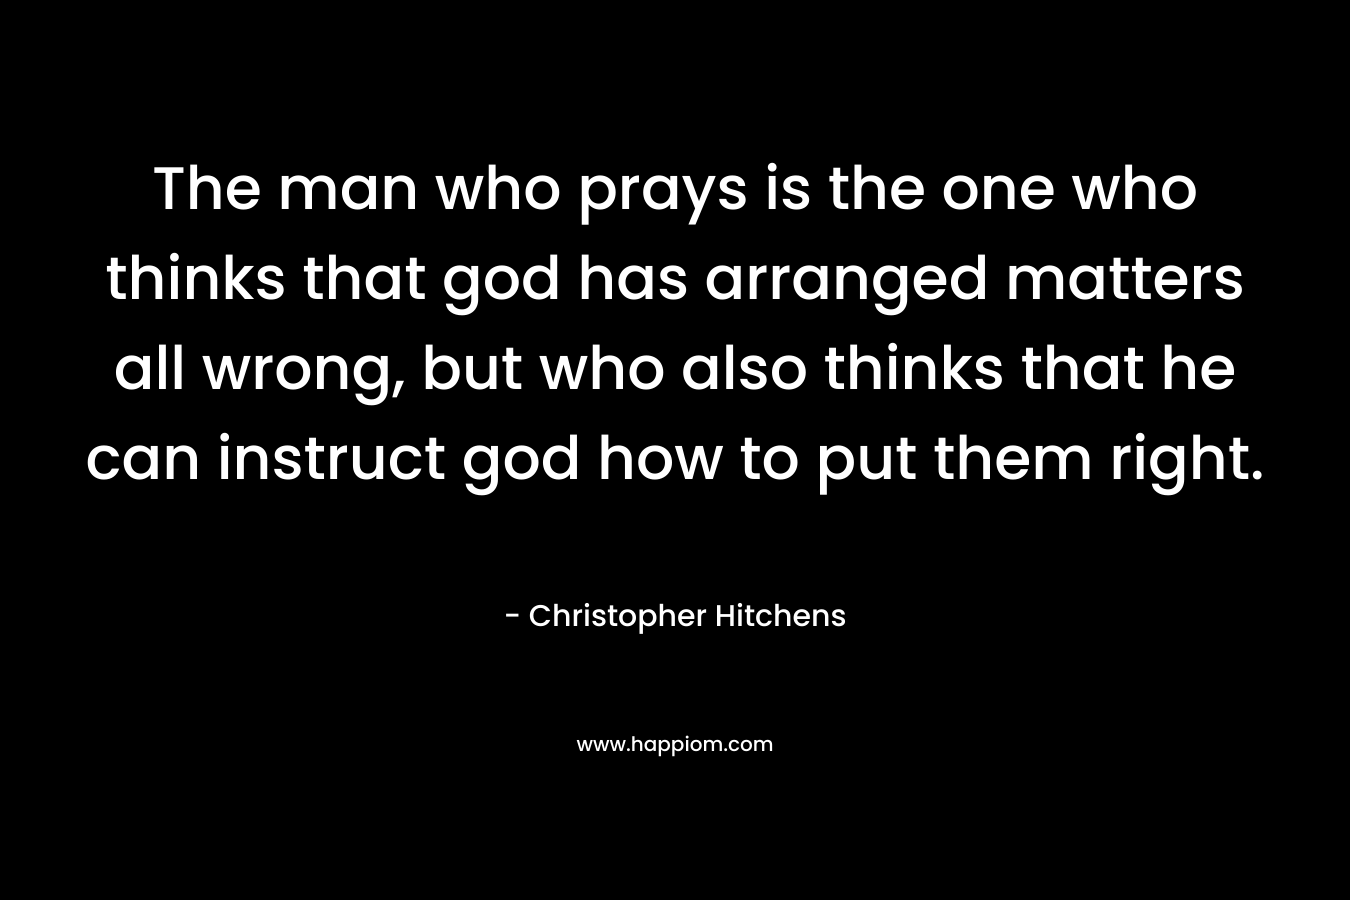 The man who prays is the one who thinks that god has arranged matters all wrong, but who also thinks that he can instruct god how to put them right.